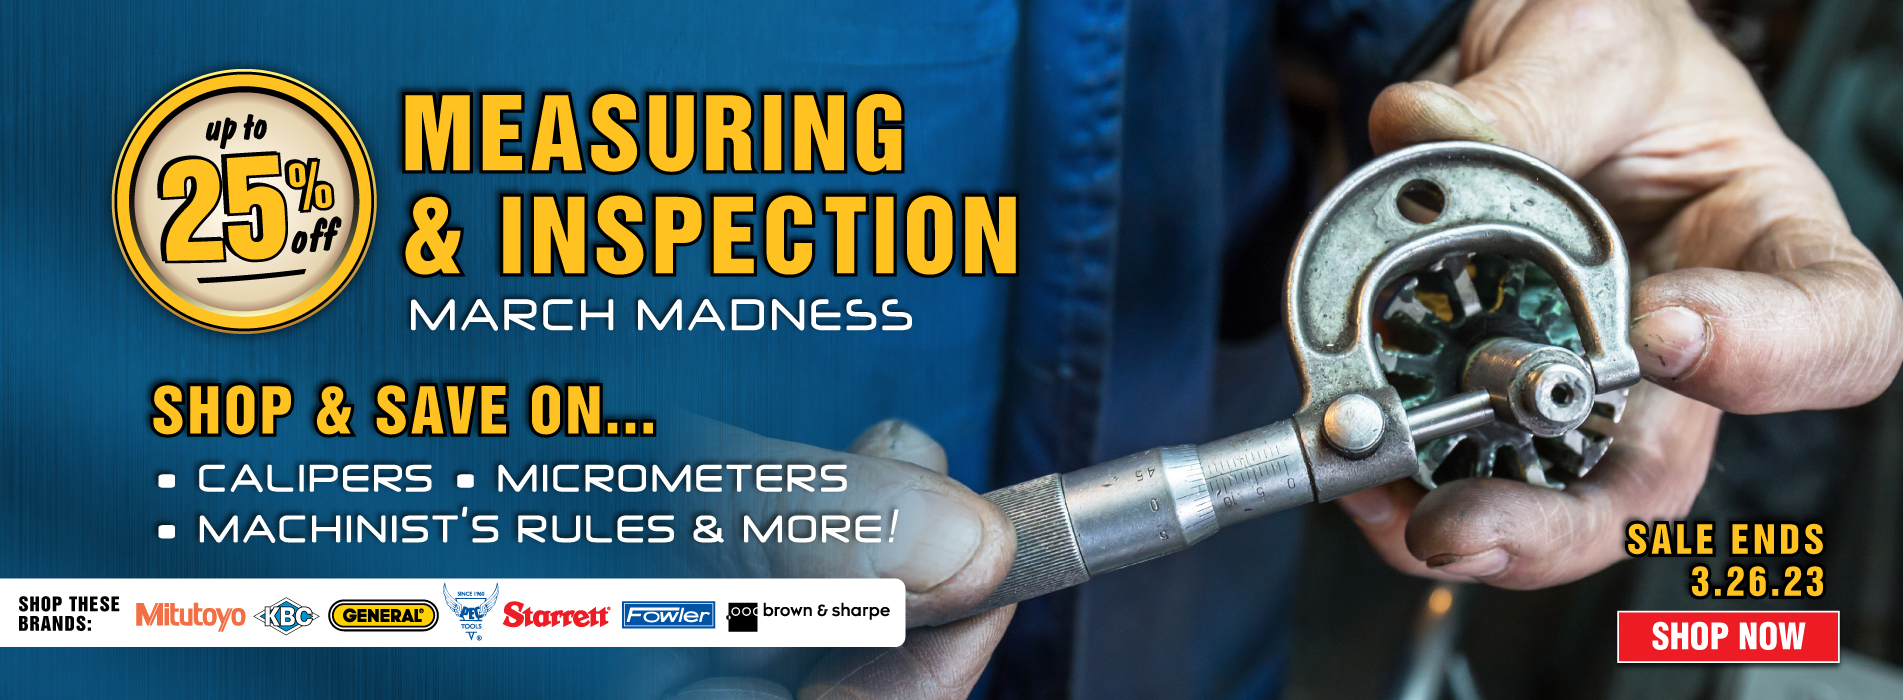 Save up to 25%! Save on Calipers, Micrometers, and more! 